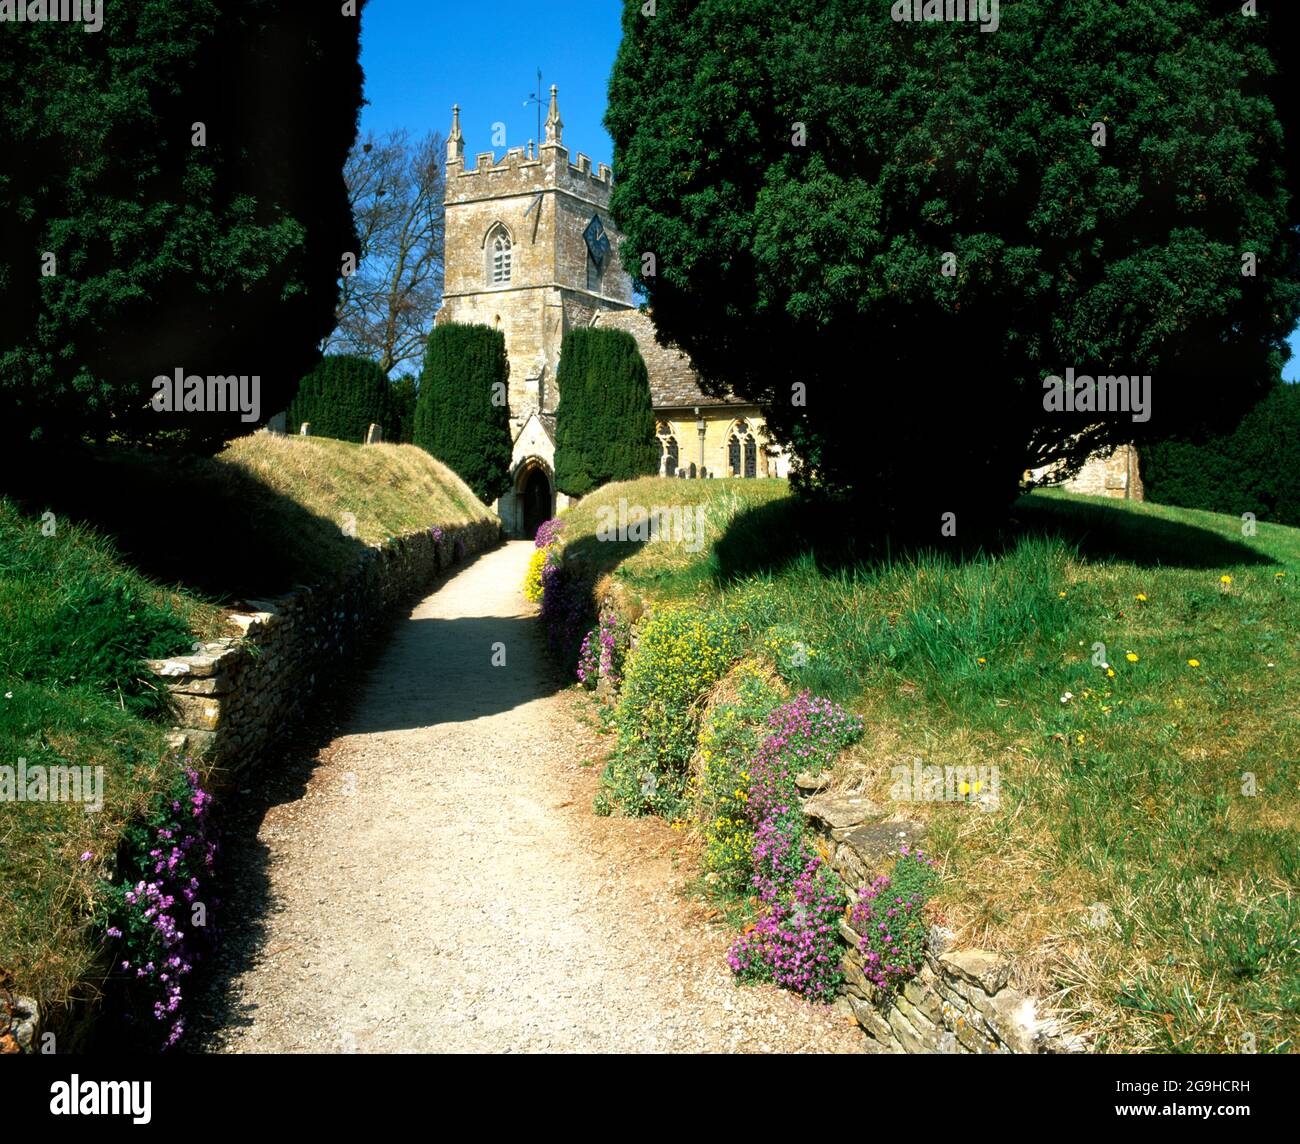 St. Peter's Church, Upper Slaughter, Cotswolds, Gloucestershire. Stockfoto